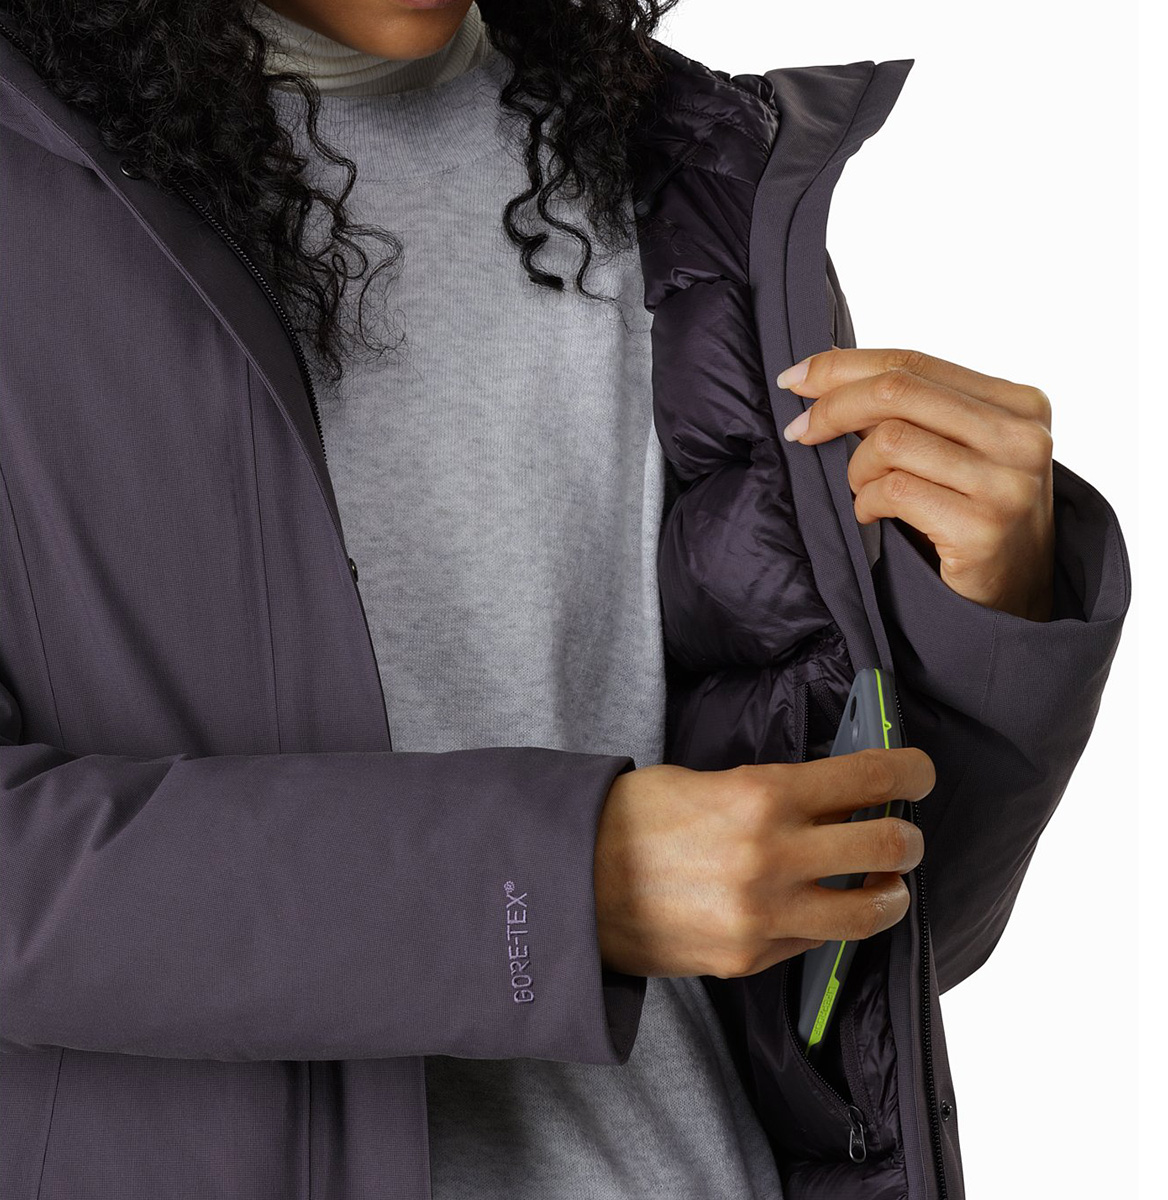 Centrale Parka, women's, discontinued Fall 2019 colors